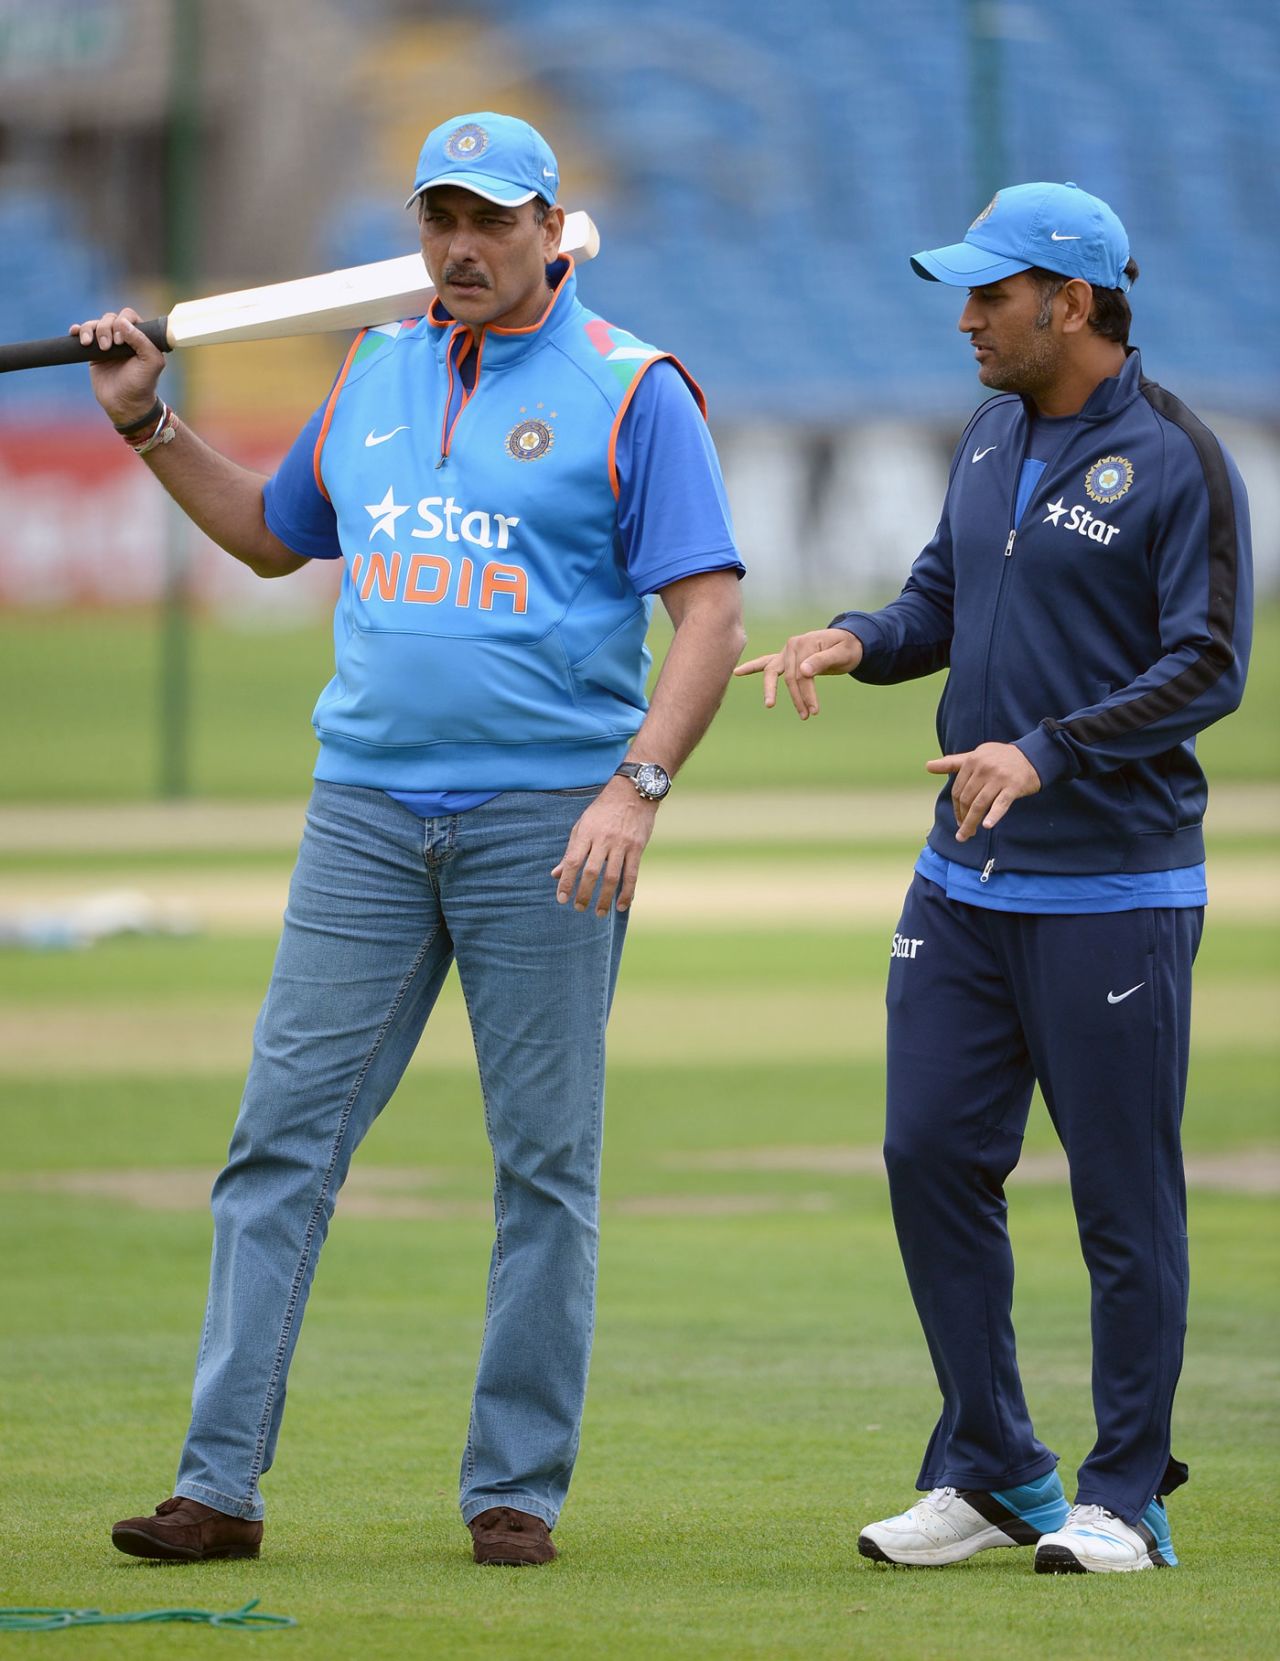 Ravi Shastri opted for the India top and jeans combo, Headingley, September 4, 2014